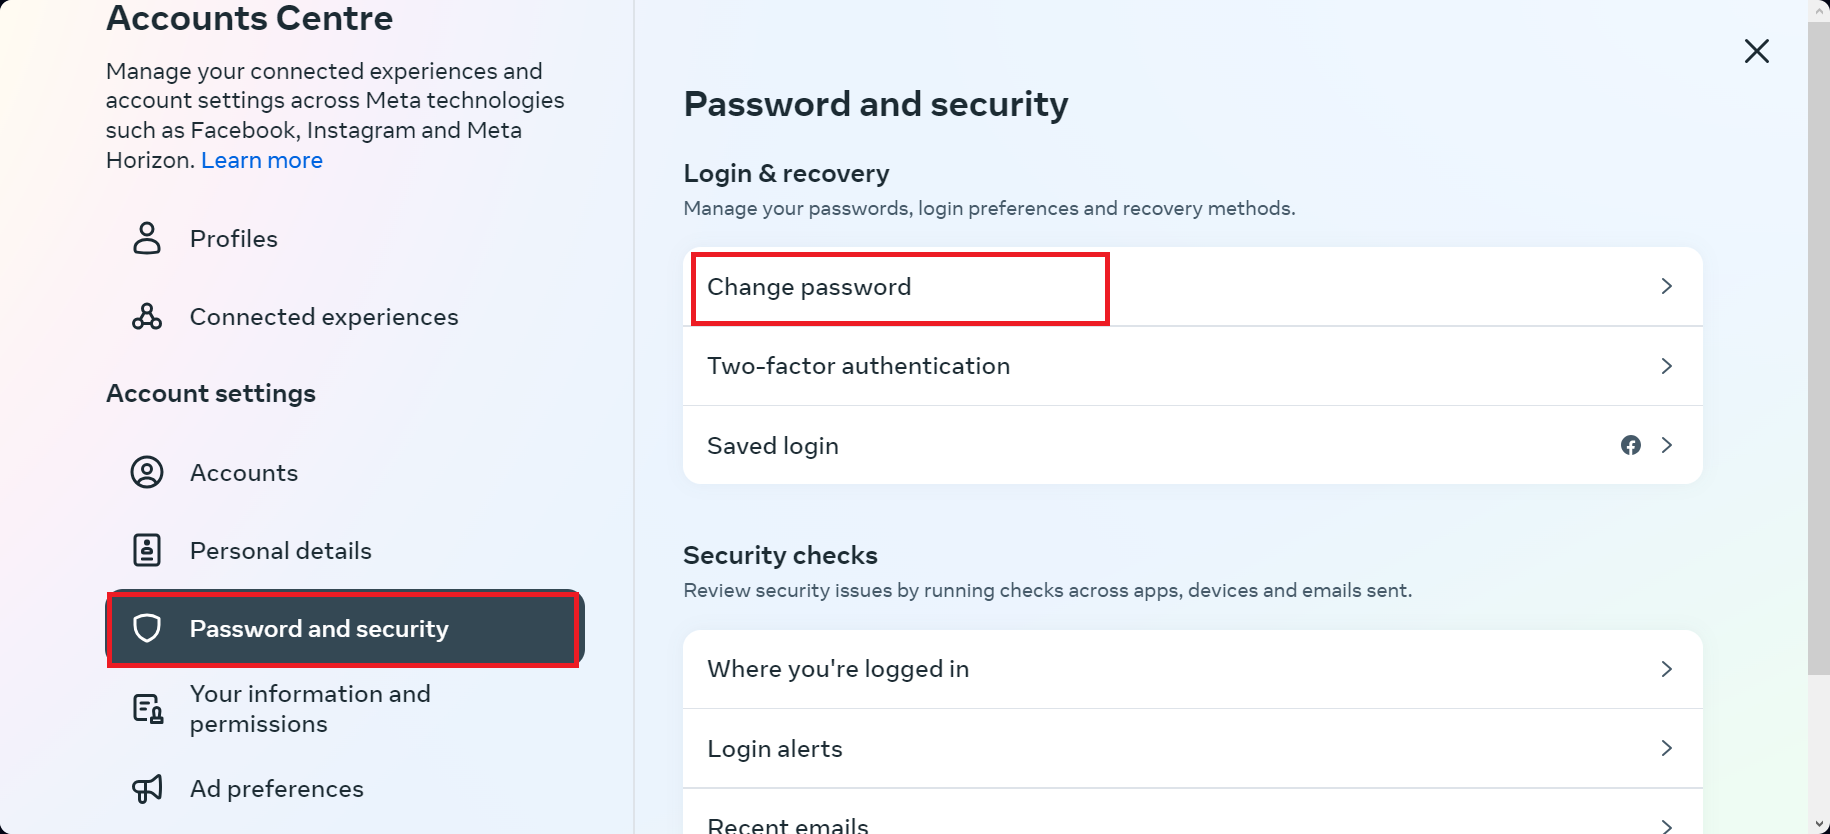 Select password and security